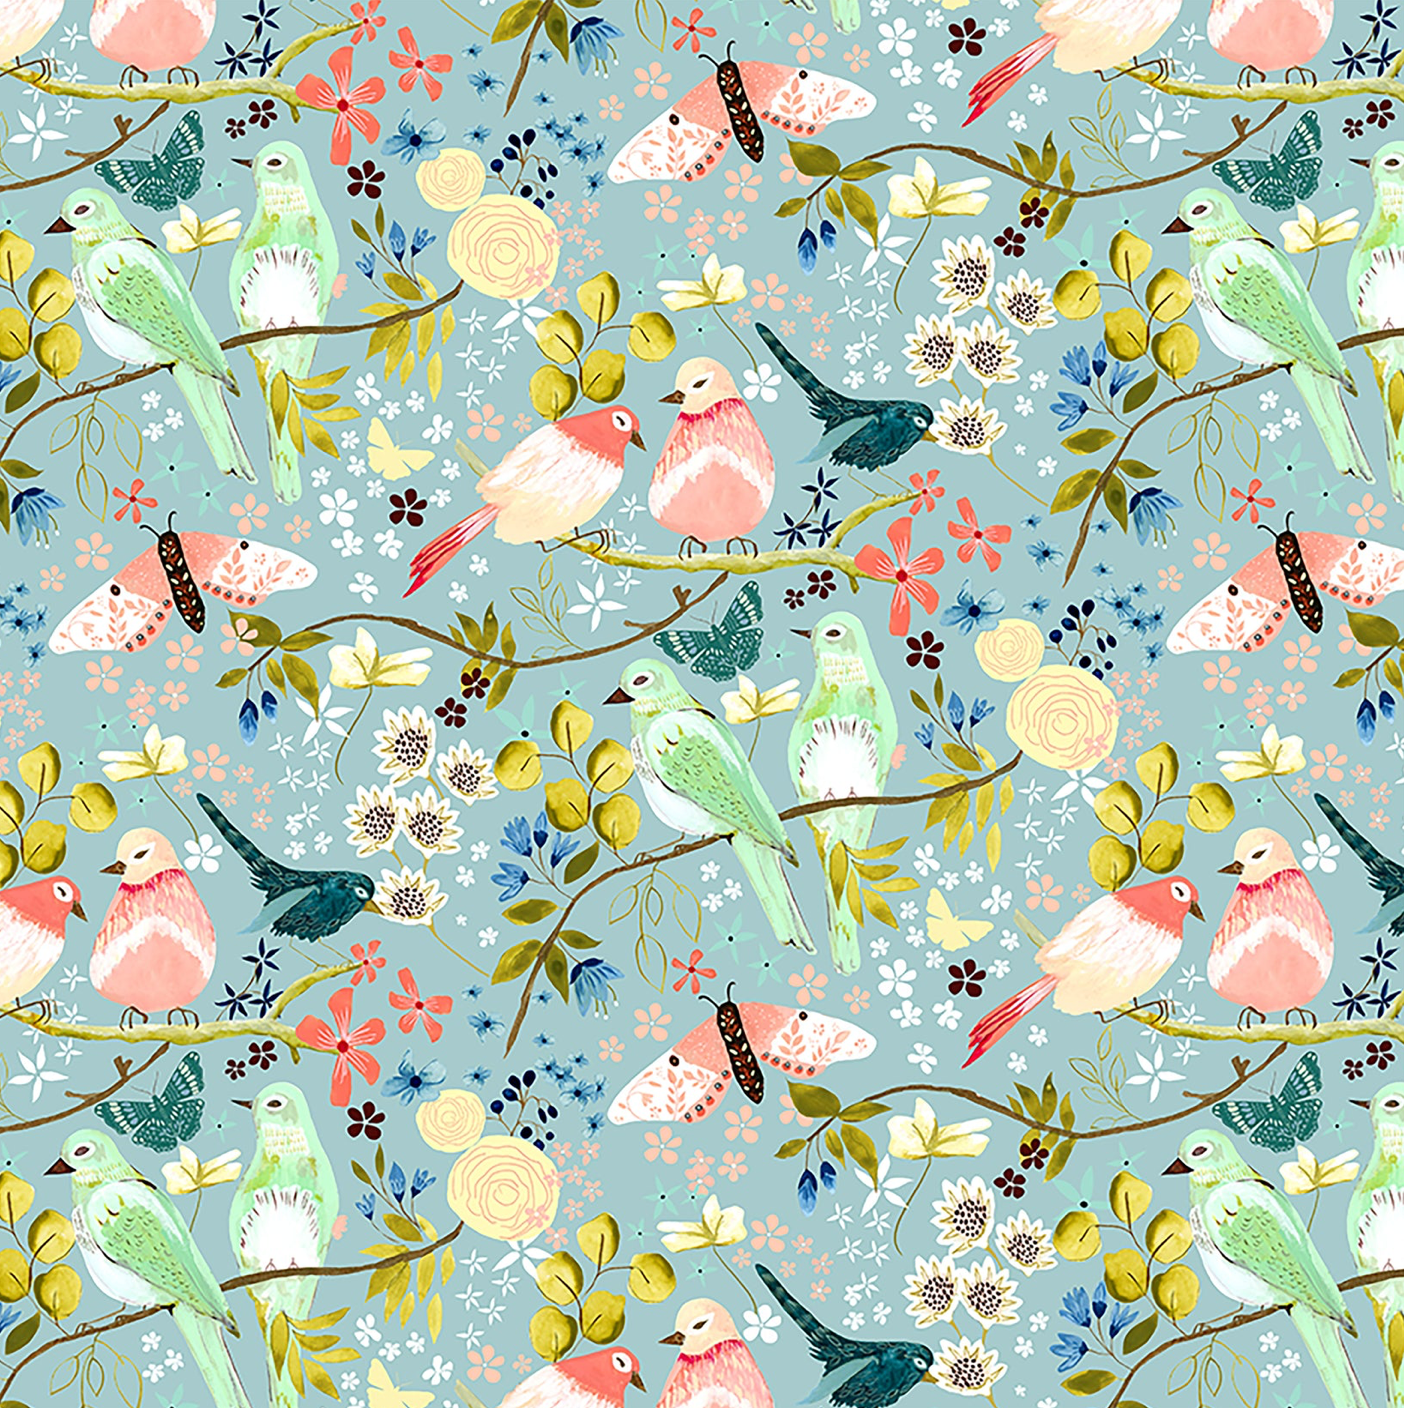 Serenity Blooms, Morning Song Blue, SR24500, sold by the 1/2 yard, *PREORDER